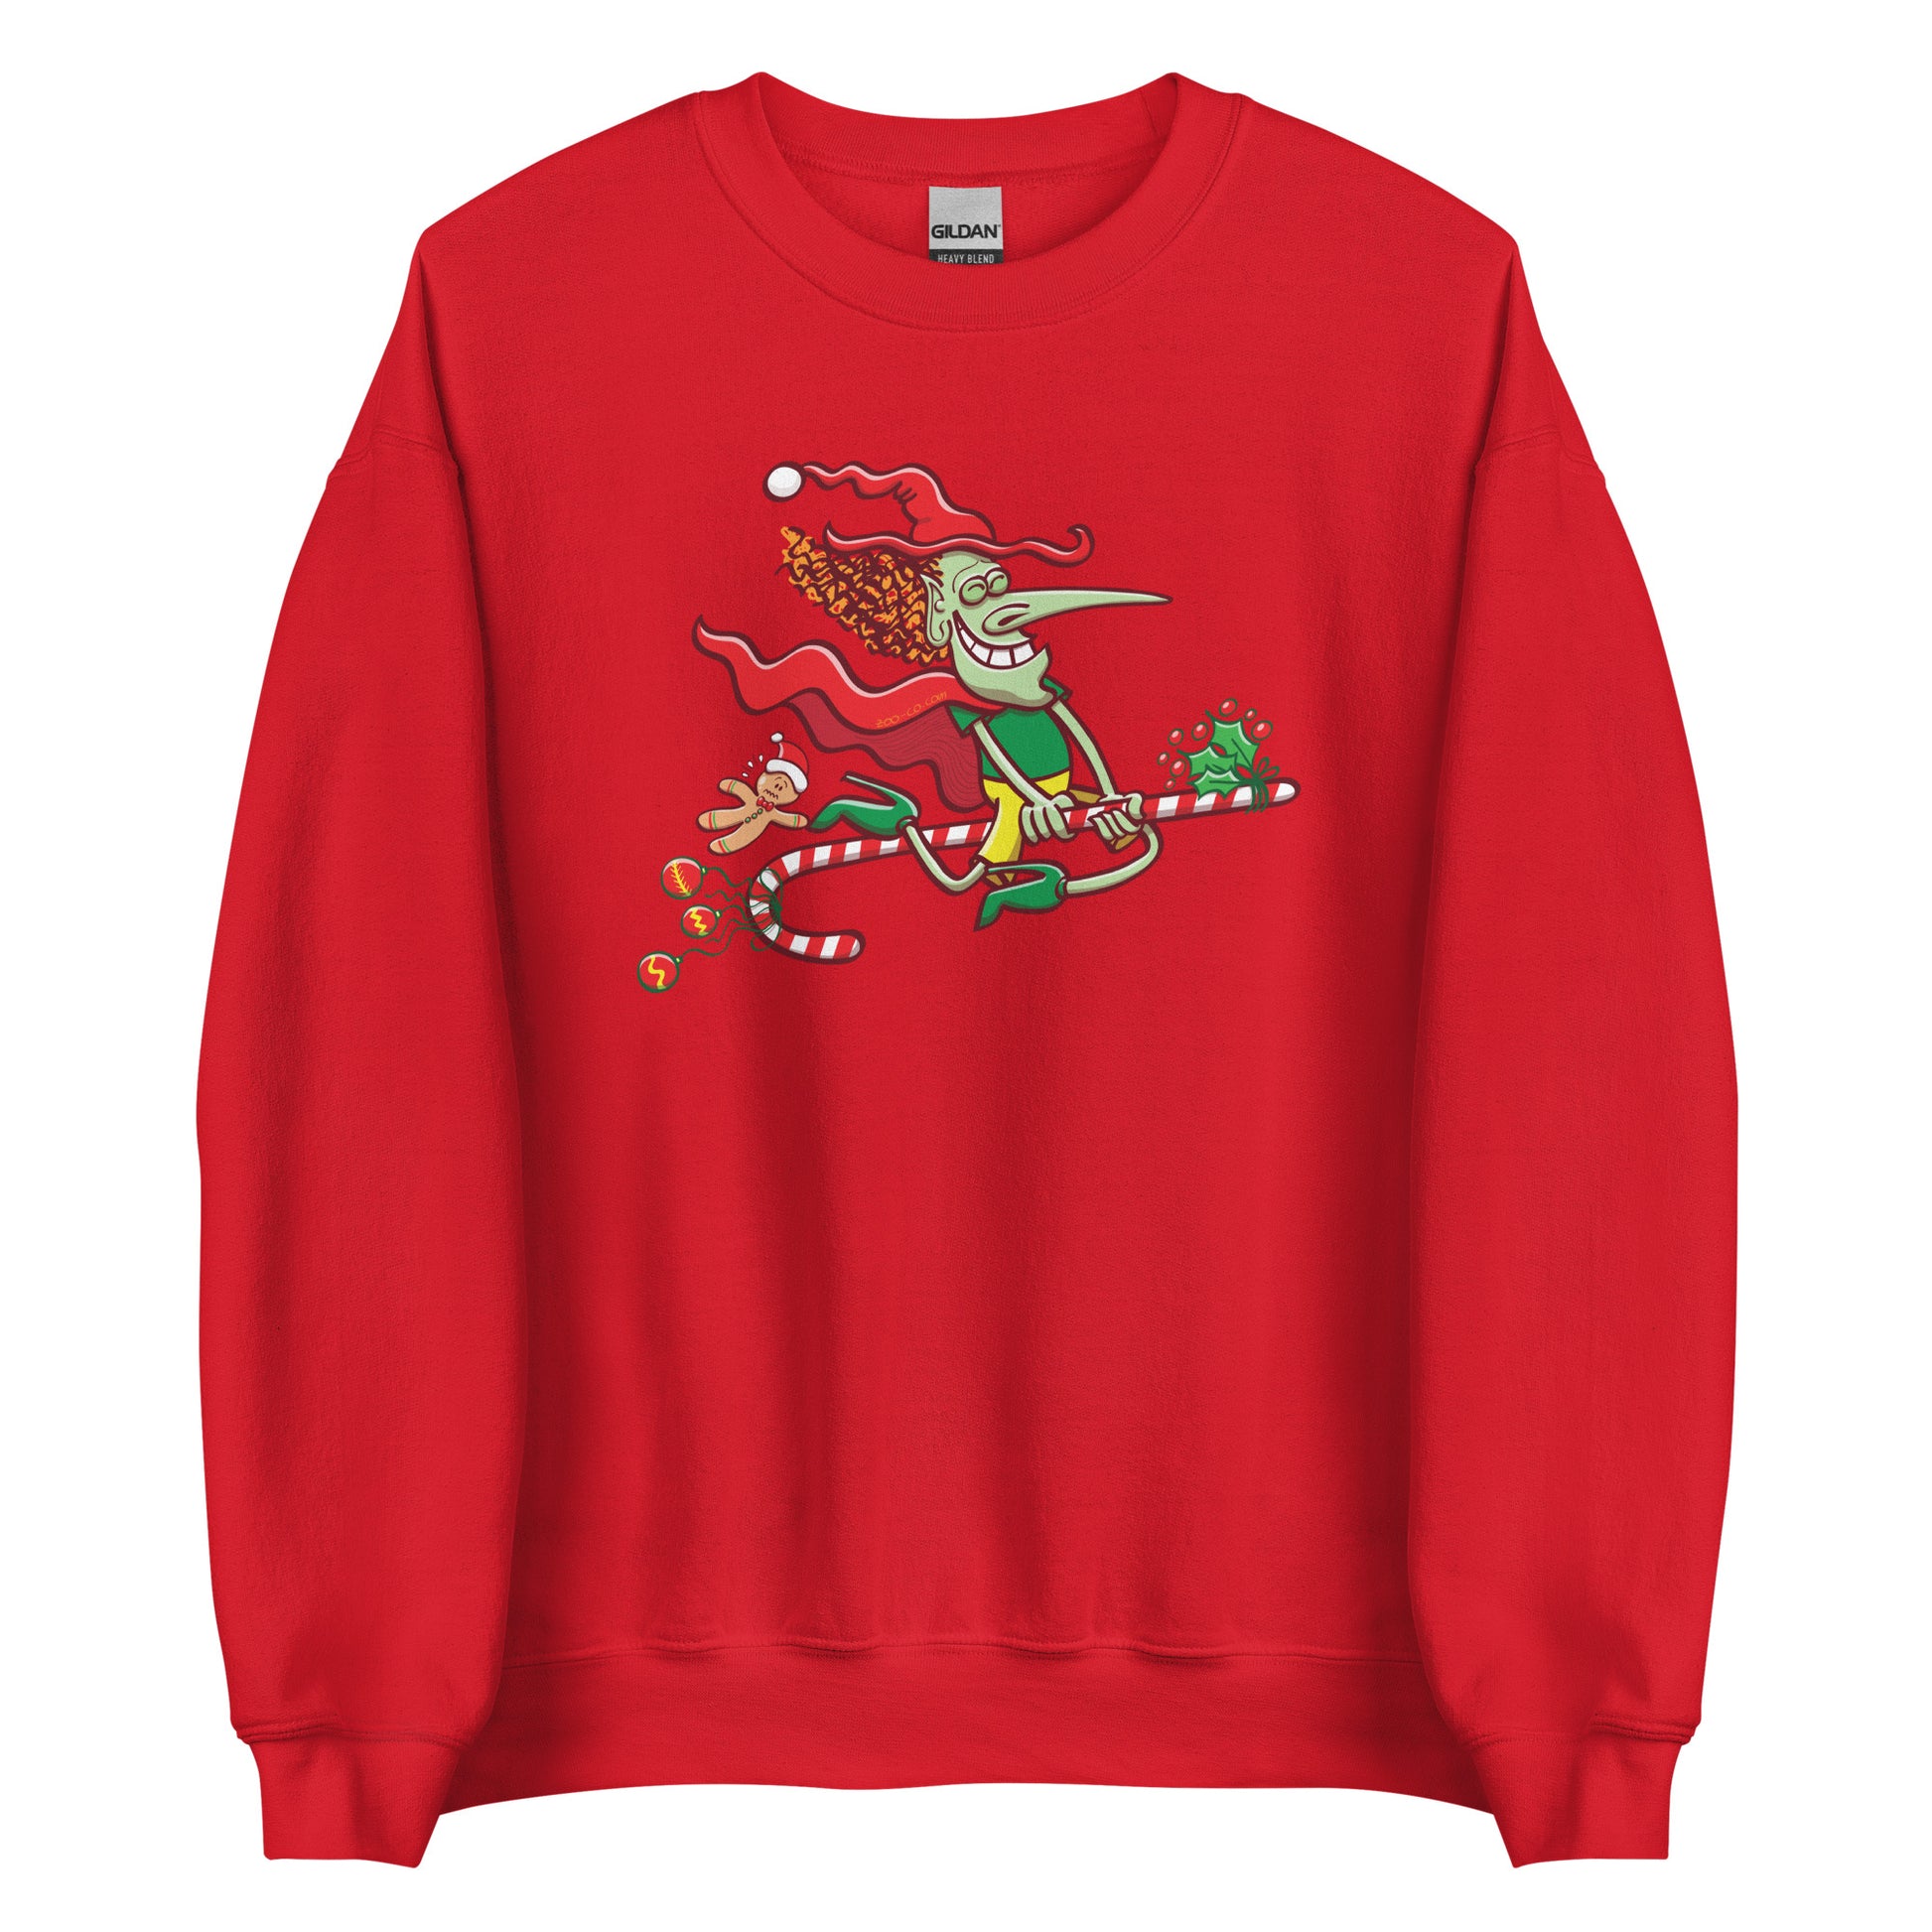 Mischievous witch having fun at Christmas - Unisex Sweatshirt. Red. Front view